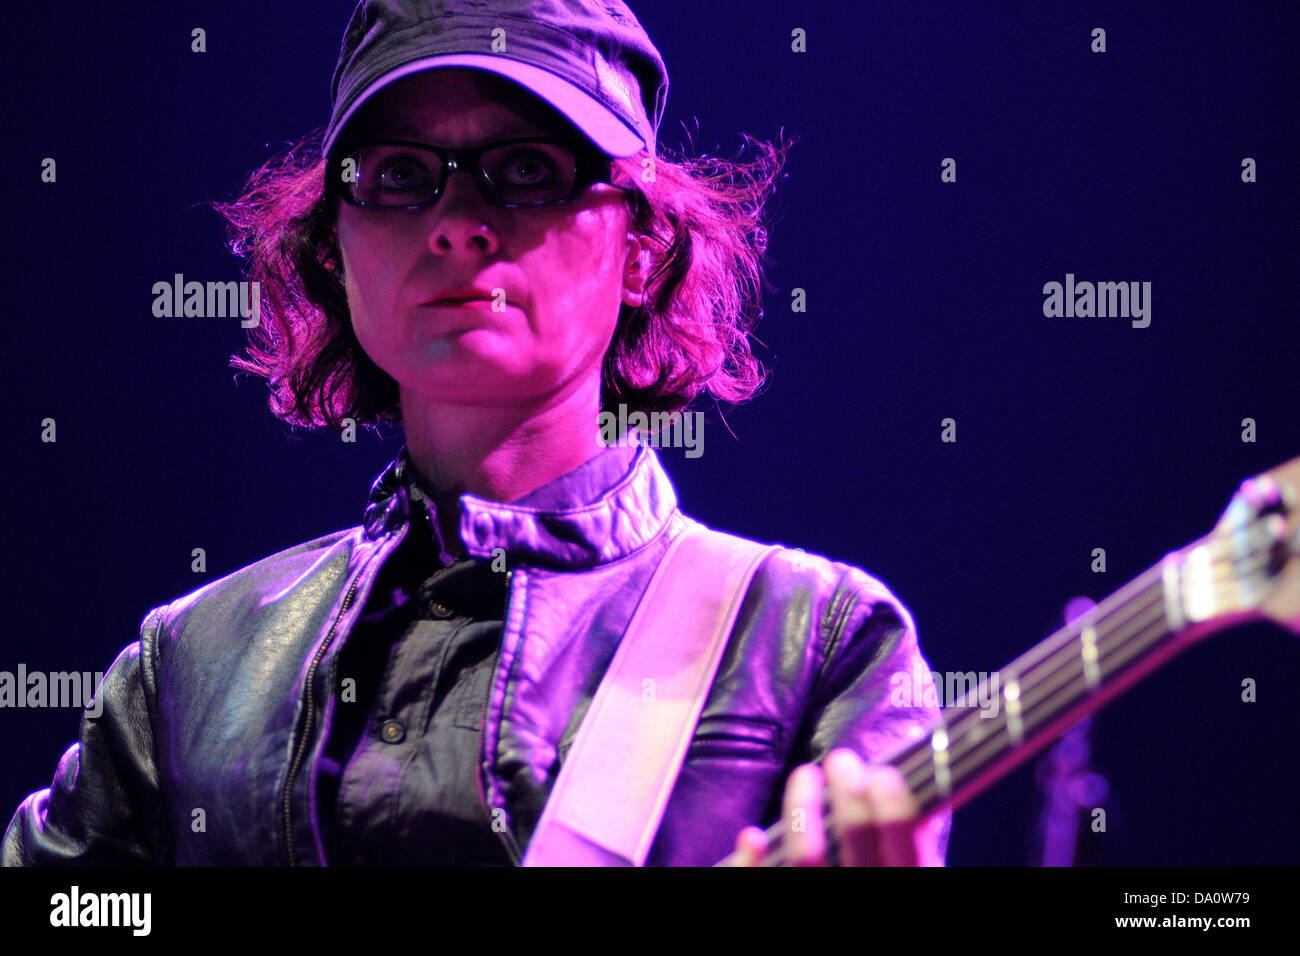 BARCELONA - MAY 24: Josephine Wiggs, bass player for The Breeders band, performs at Heineken Primavera Sound 2013 Festival Stock Photo